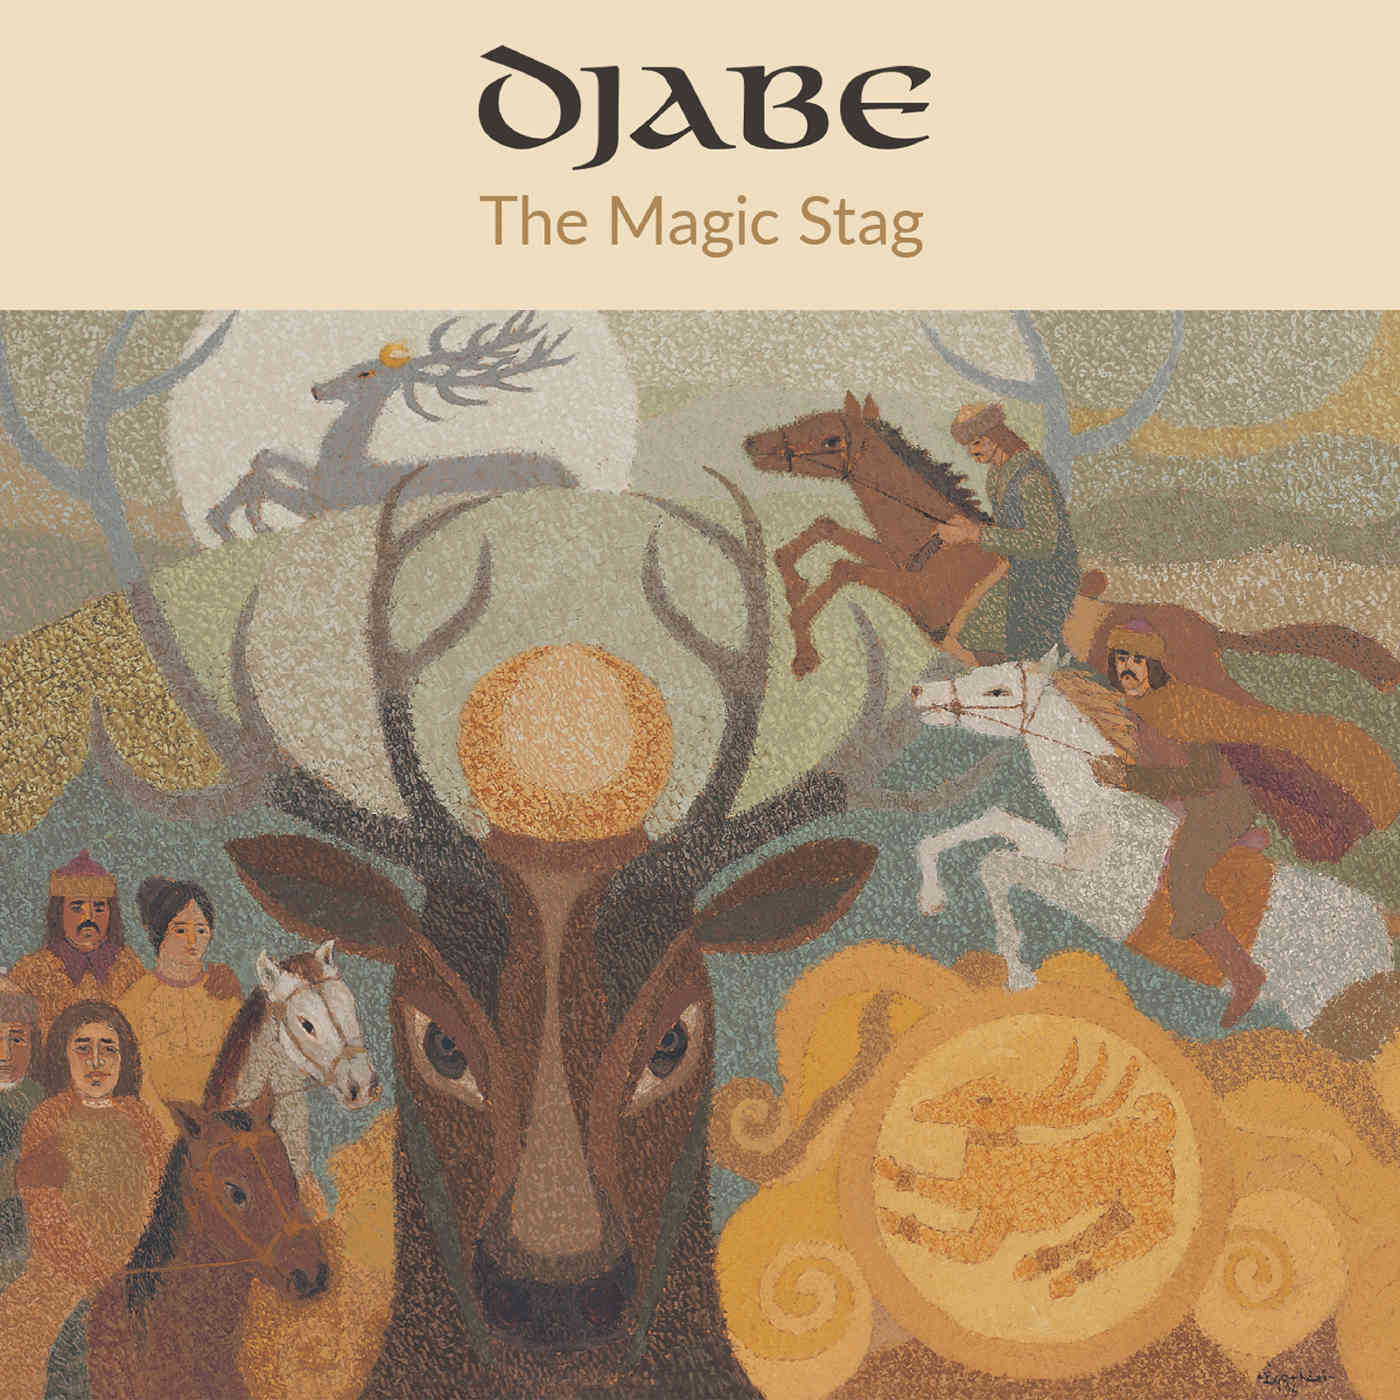 Djabe featuring Steve Hackett - The Magic Stag - CD+DVD